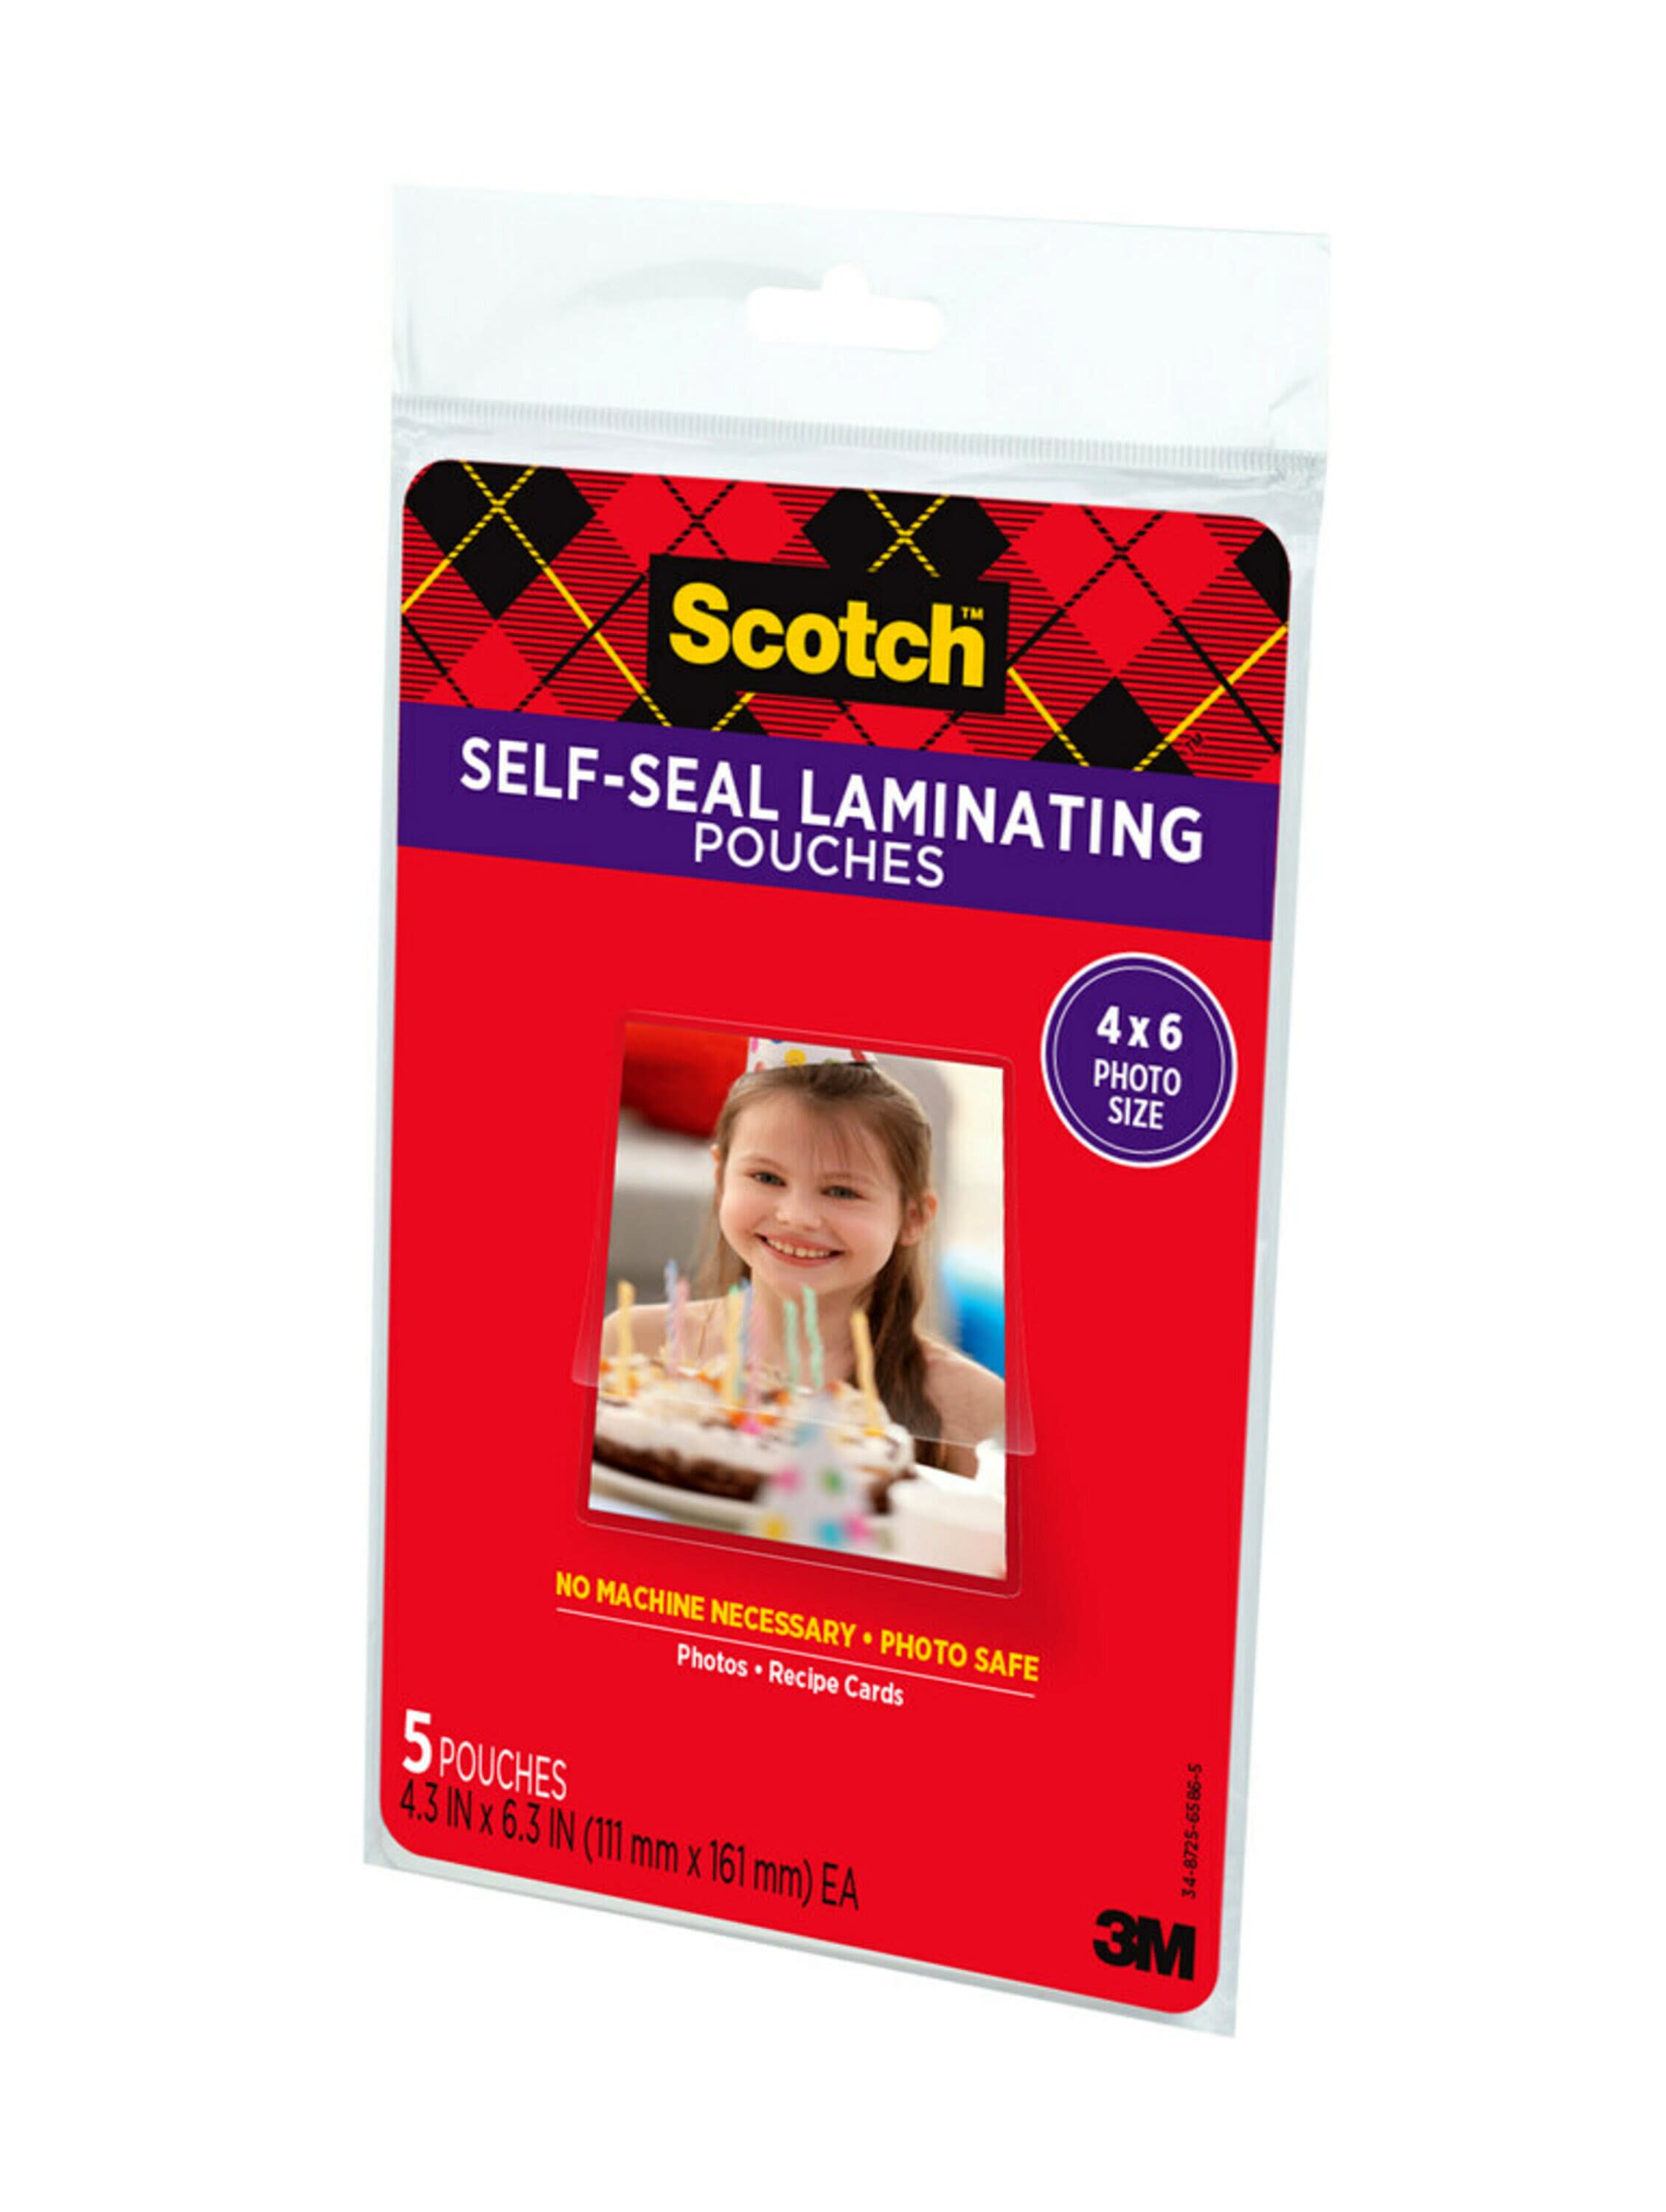 Scotch ™ Self-Sealing Laminating Pouches 4.3 in x 6.3 in, Gloss Finish - image 2 of 8